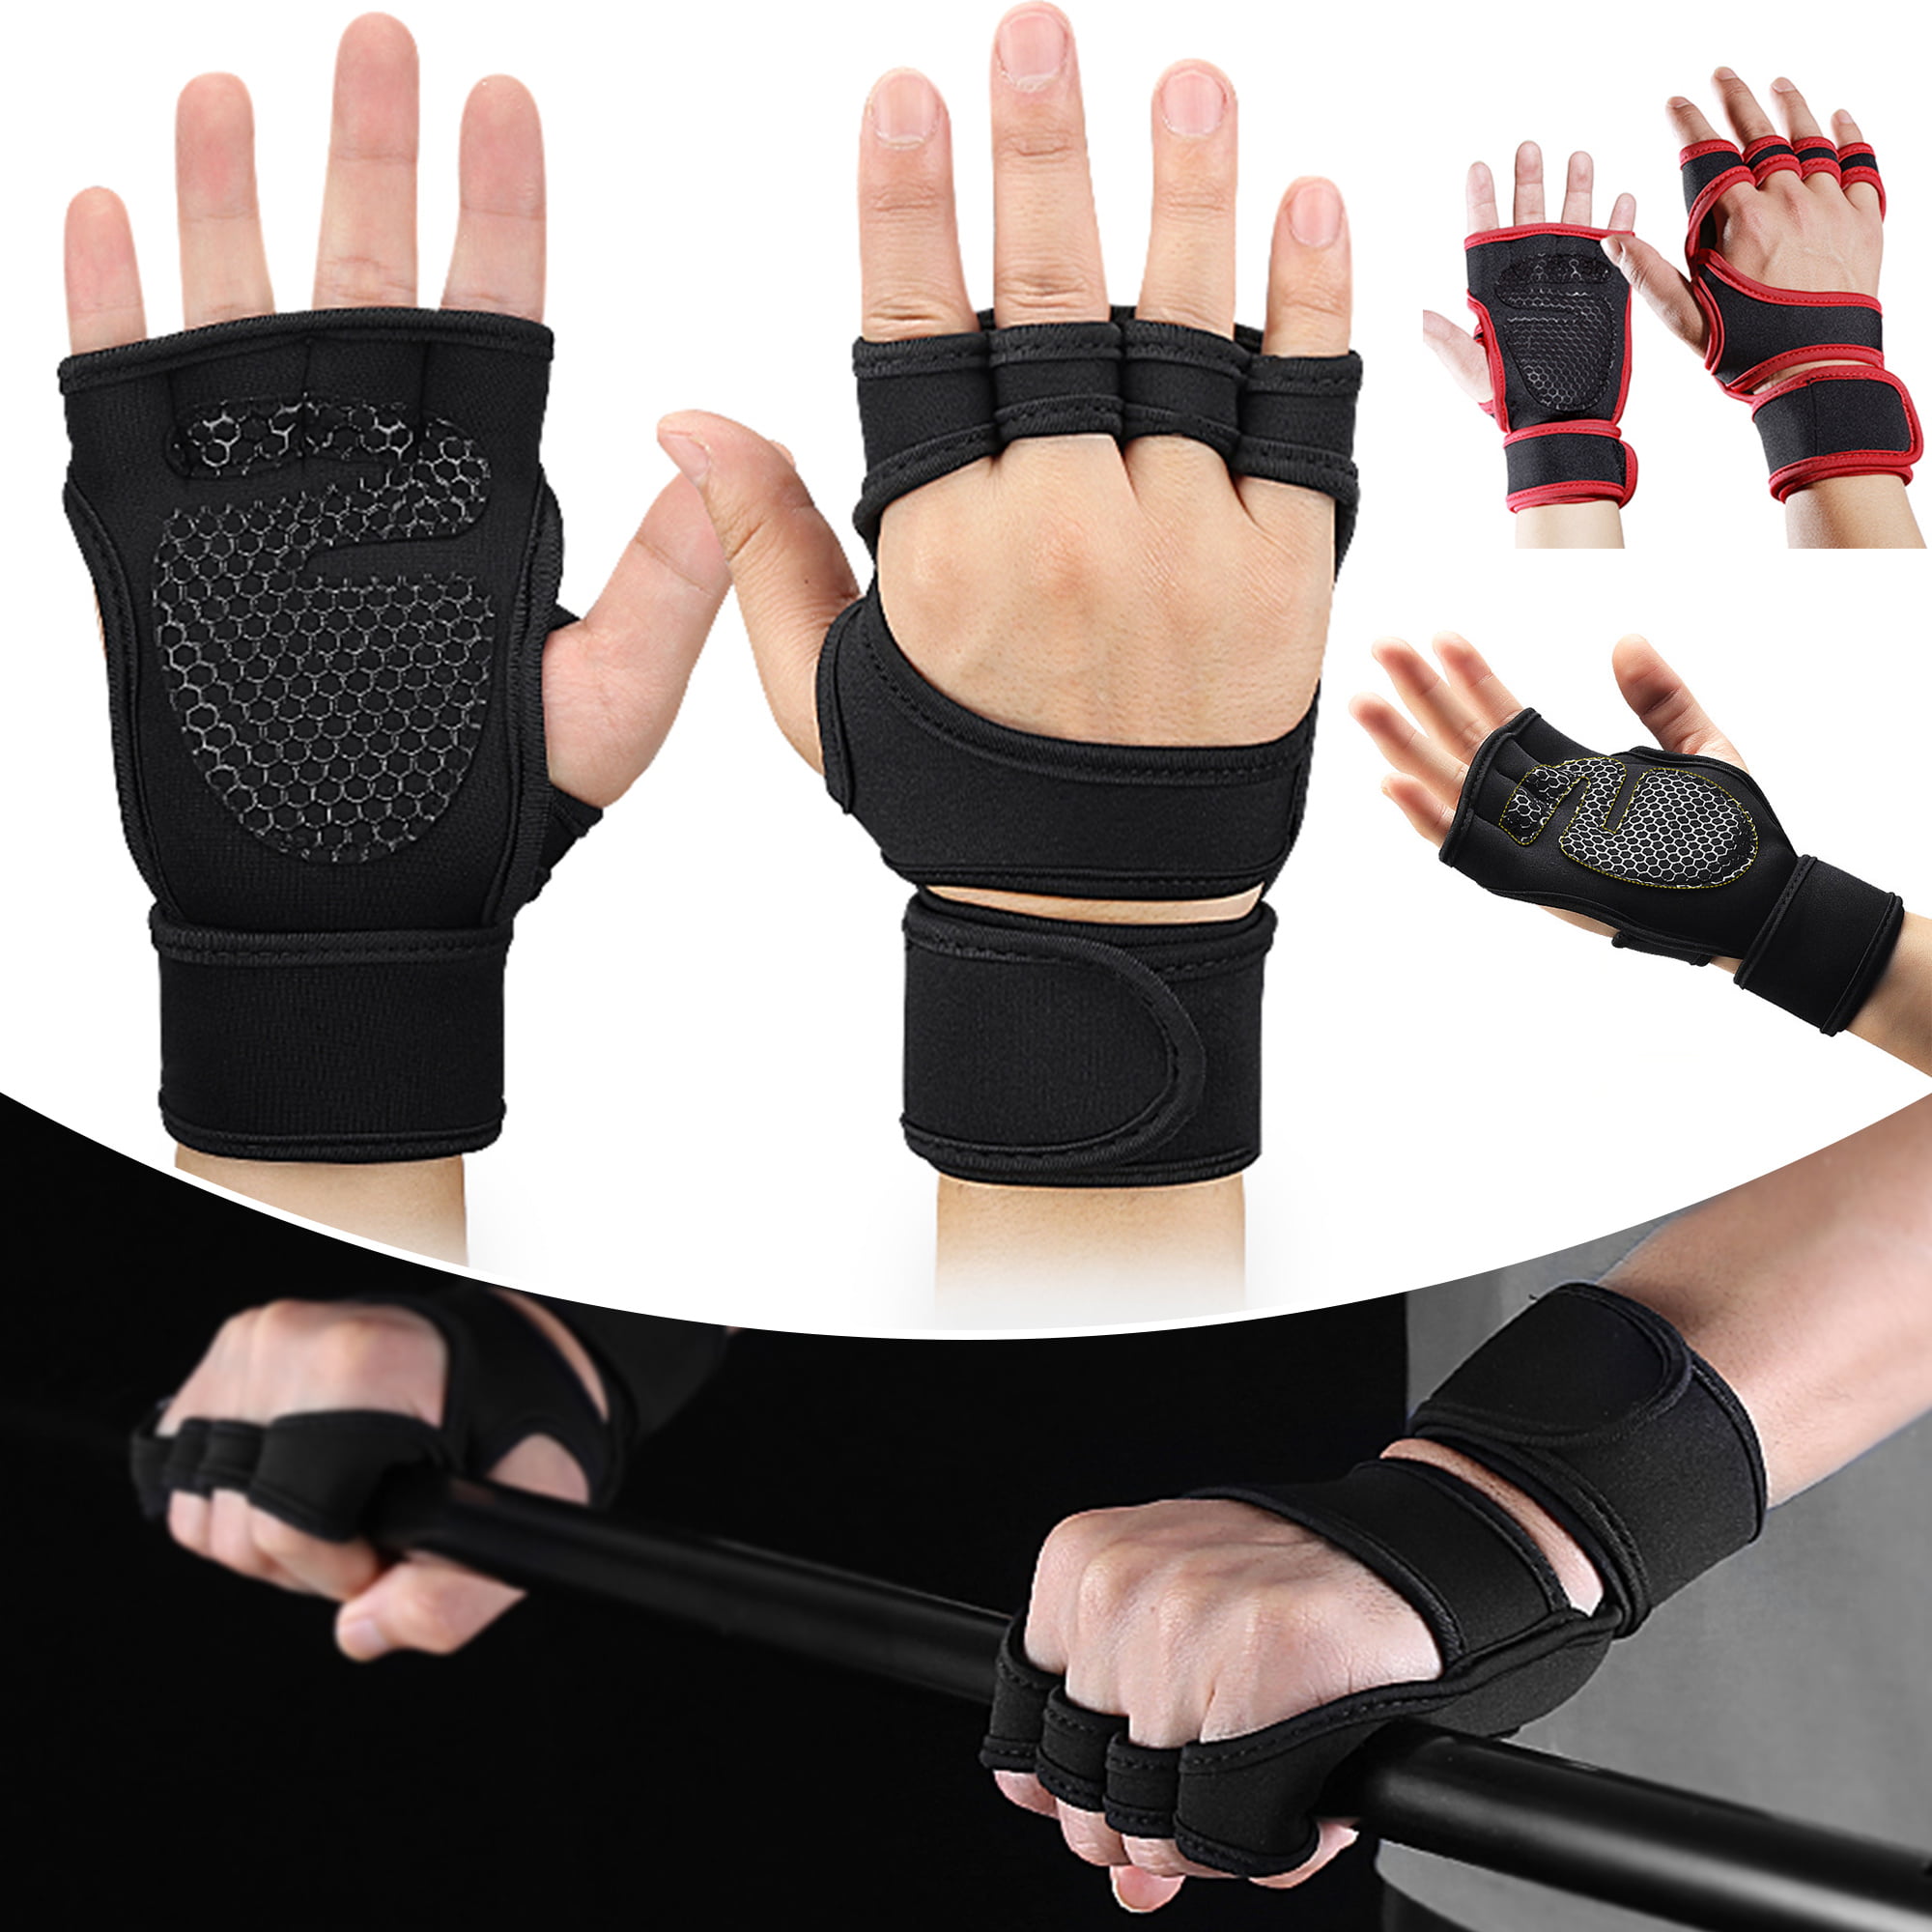 Details about  / Sport Non-Slip Gloves Weight Lifting Fitness Gym Training Half Finger Black